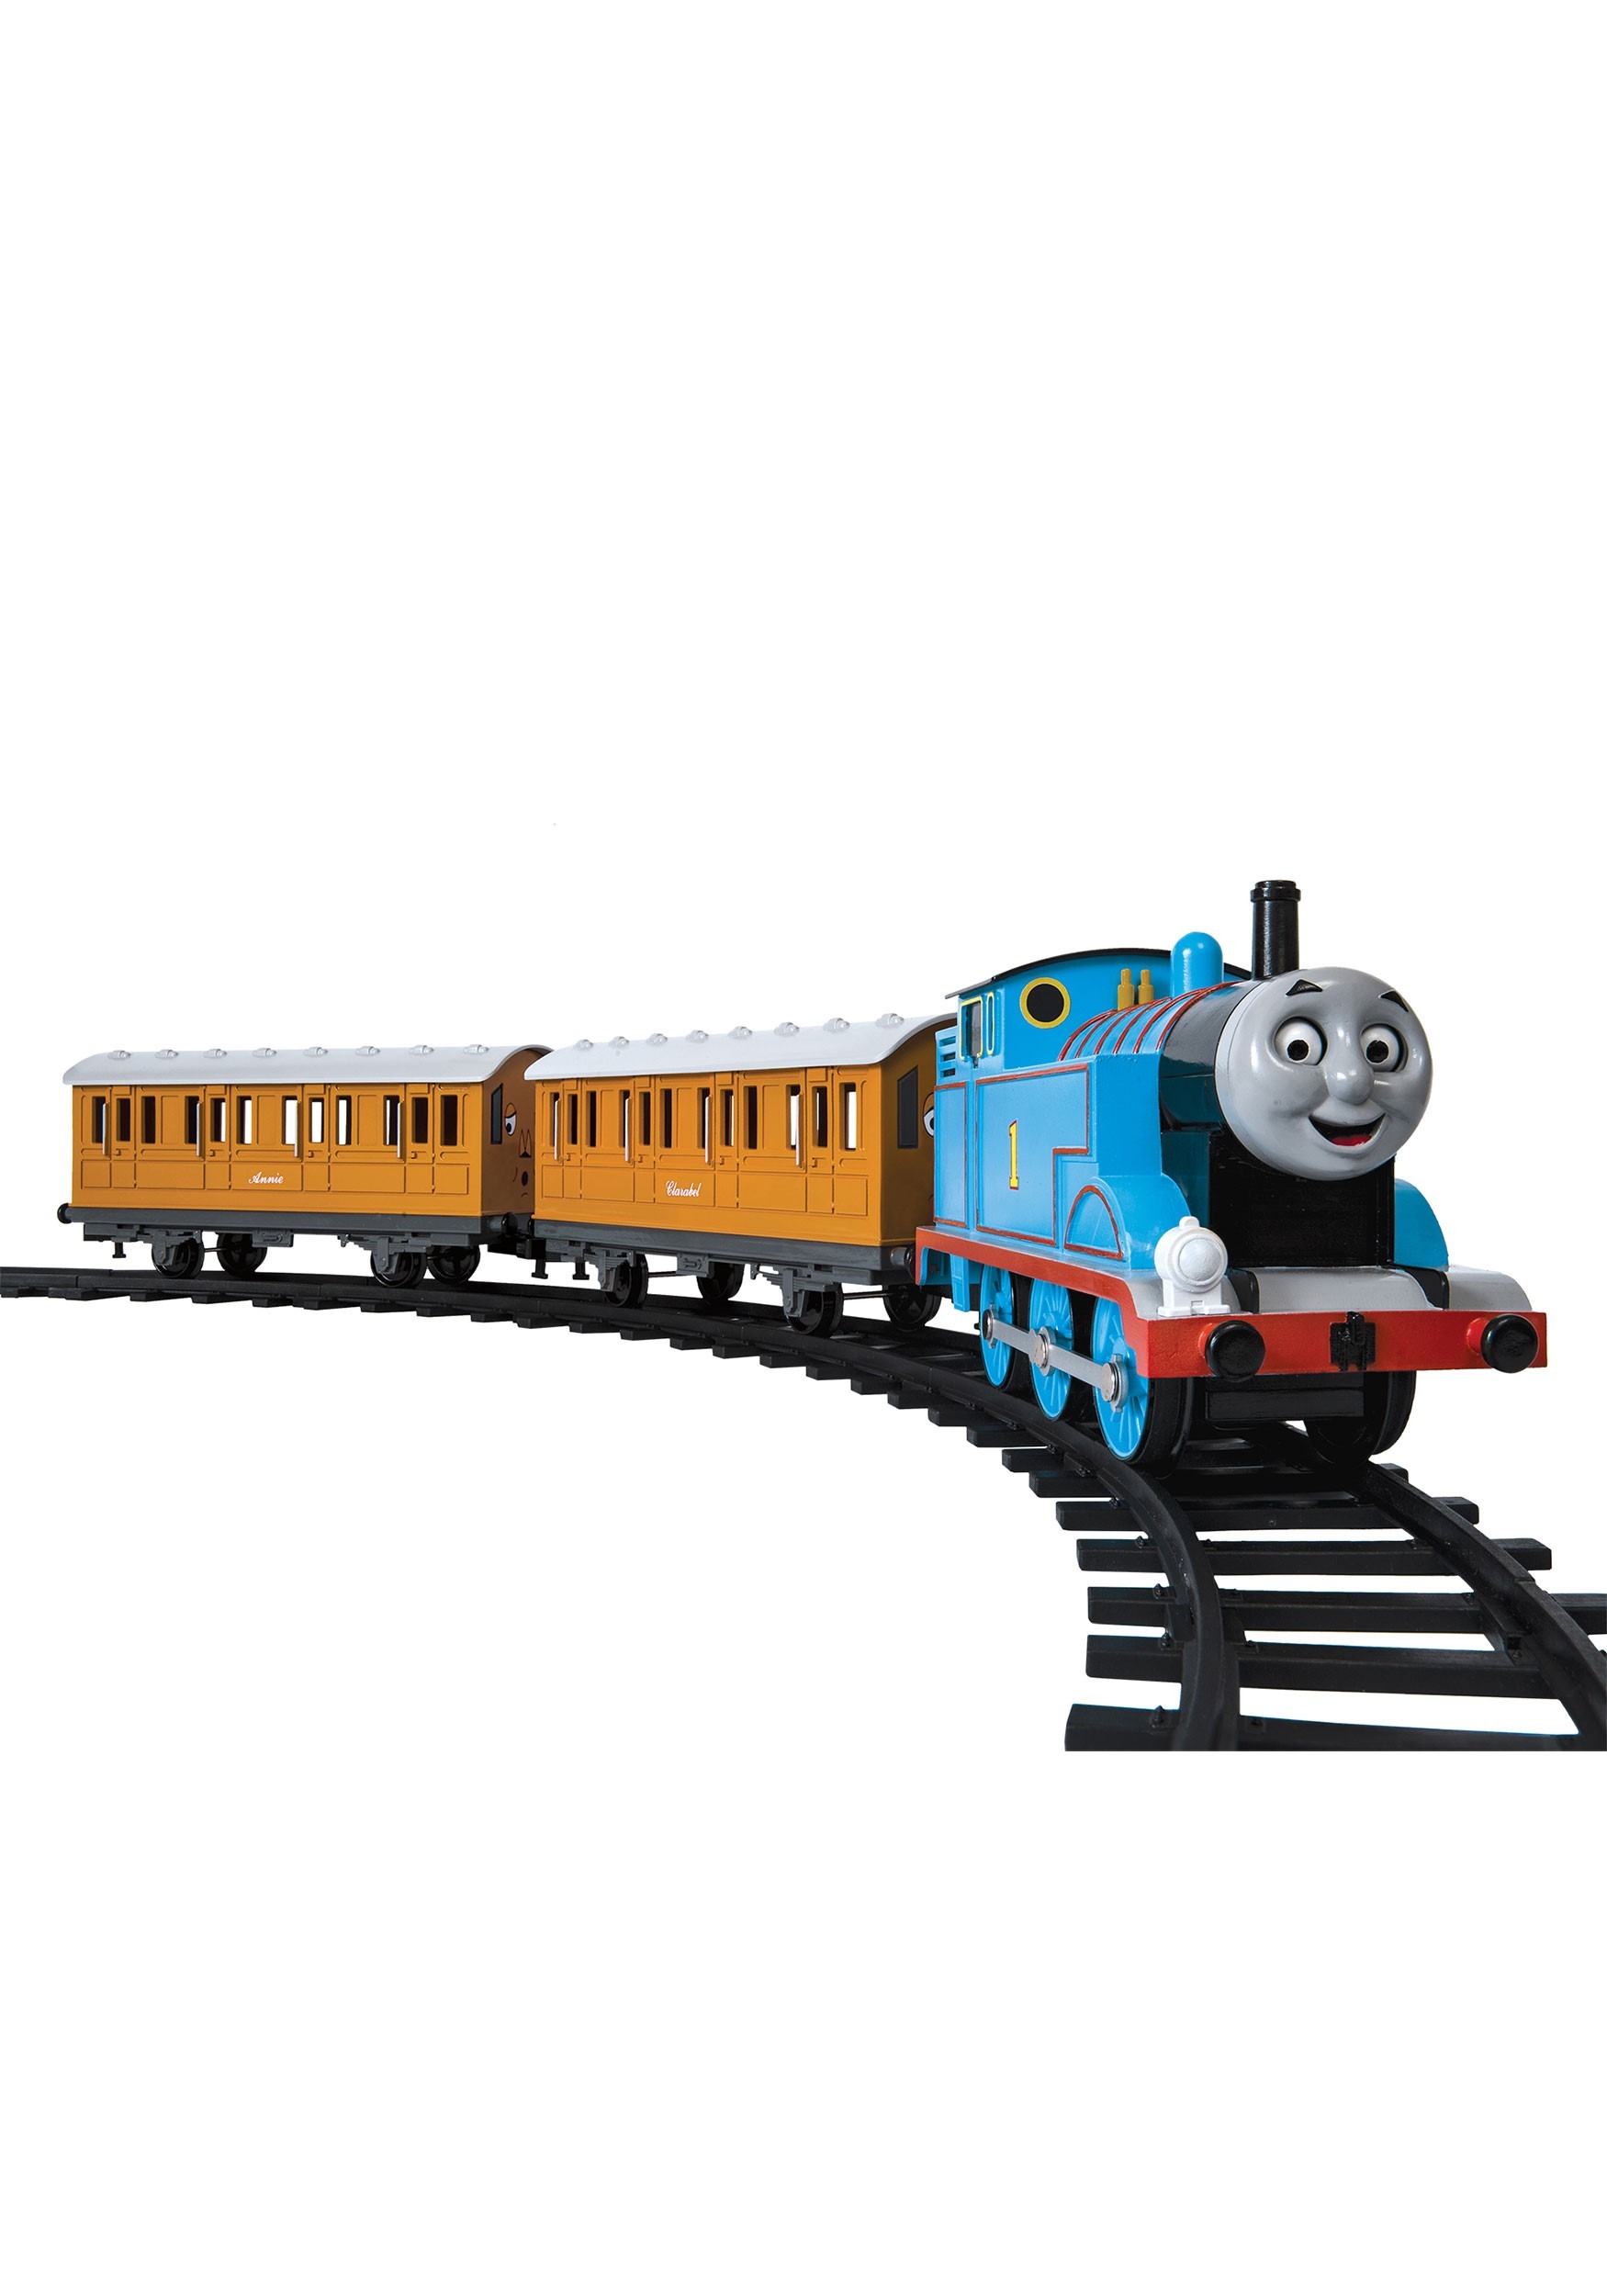 Thomas & Friends Ready-to-Play Lionel Train Set